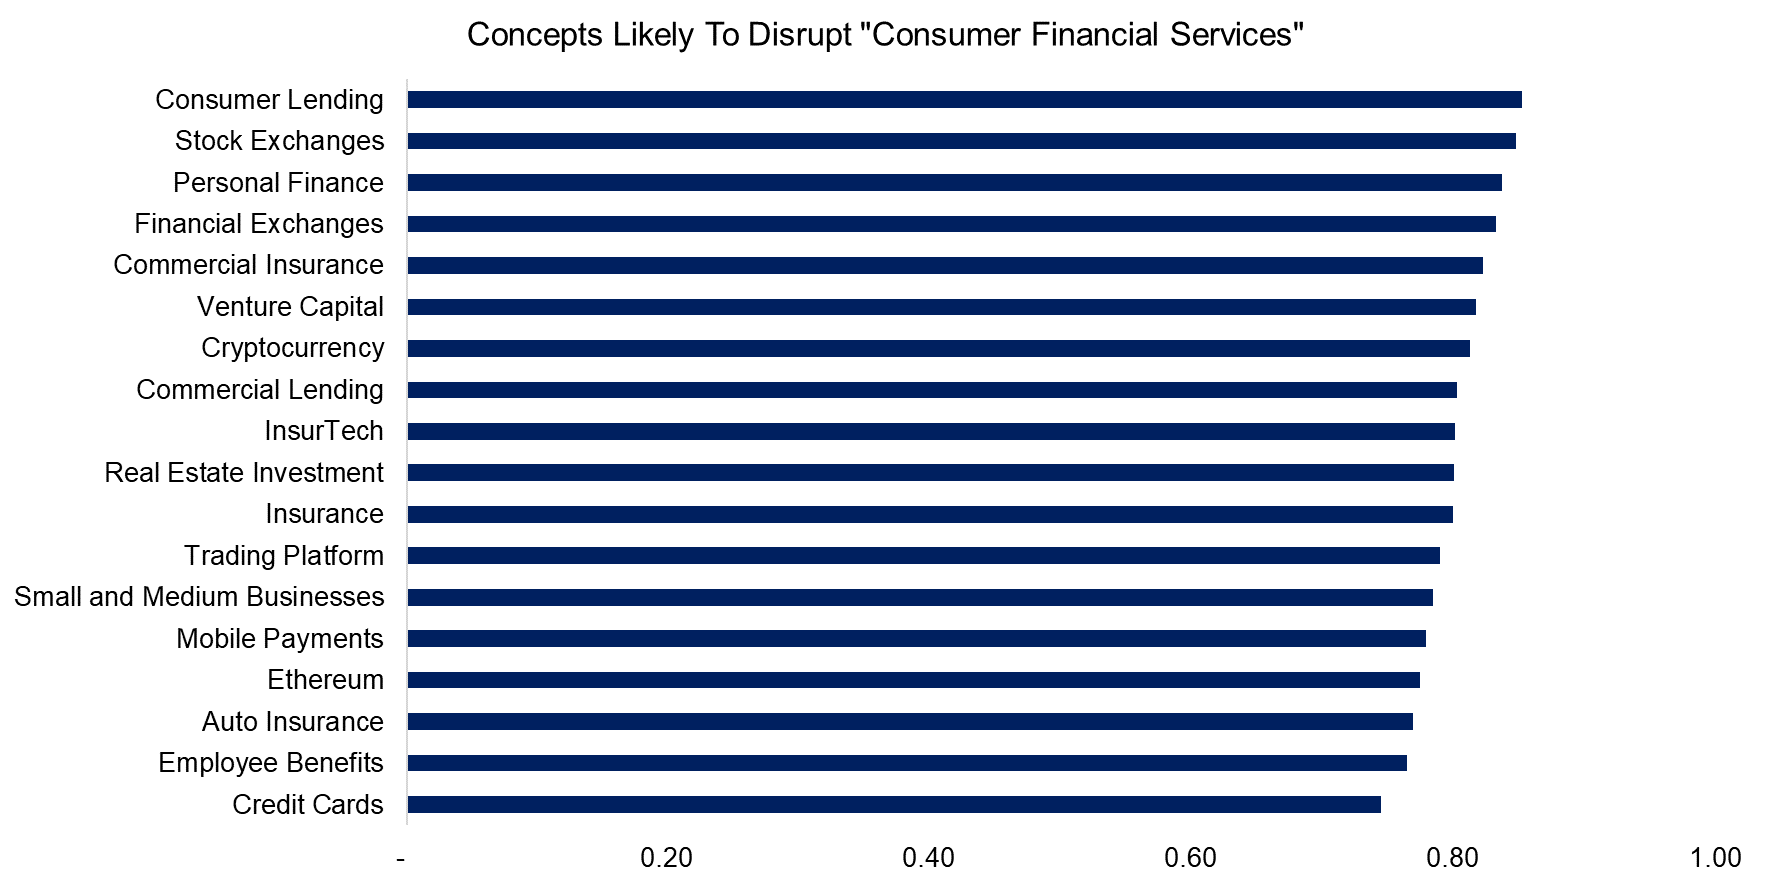 Concepts Likely To Disrupt Consumer Financial Services